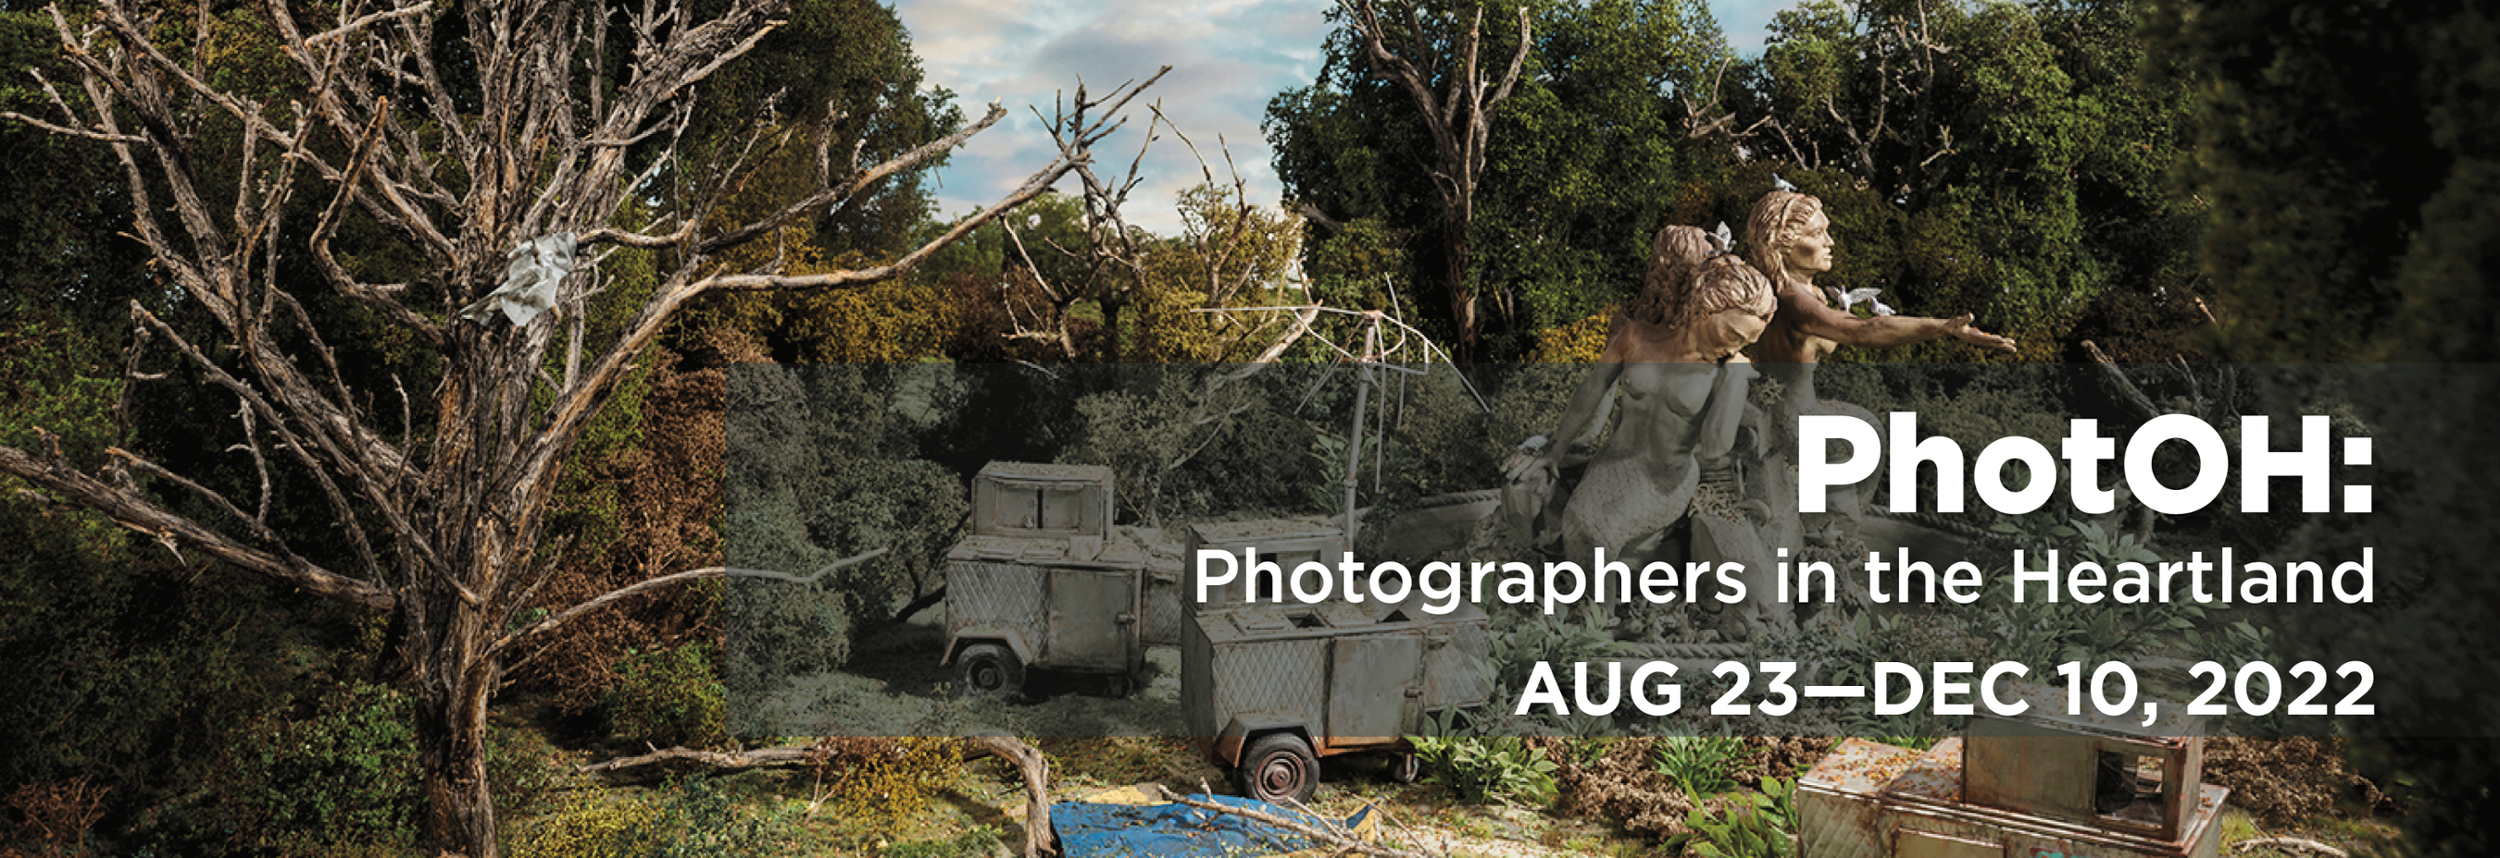 PhotOH: Photographers in the Heartland